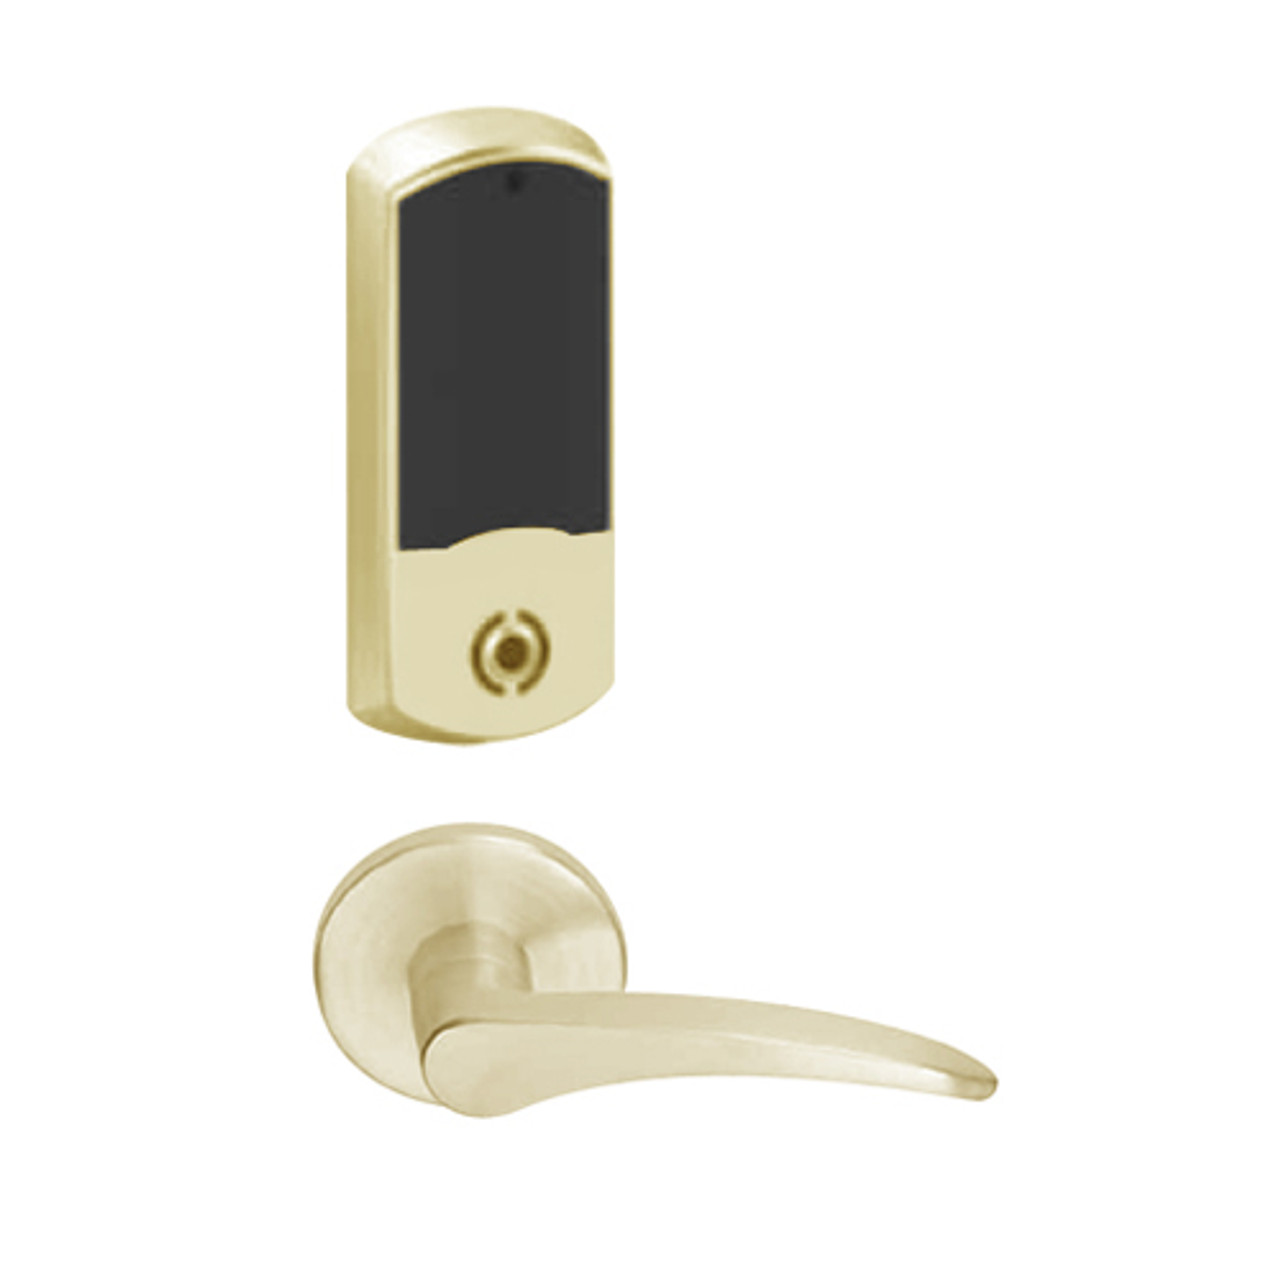 LEMS-GRW-P-12-606-00C-RH Schlage Storeroom Wireless Greenwich Mortise Lock with LED Indicator and 12 Lever in Satin Brass